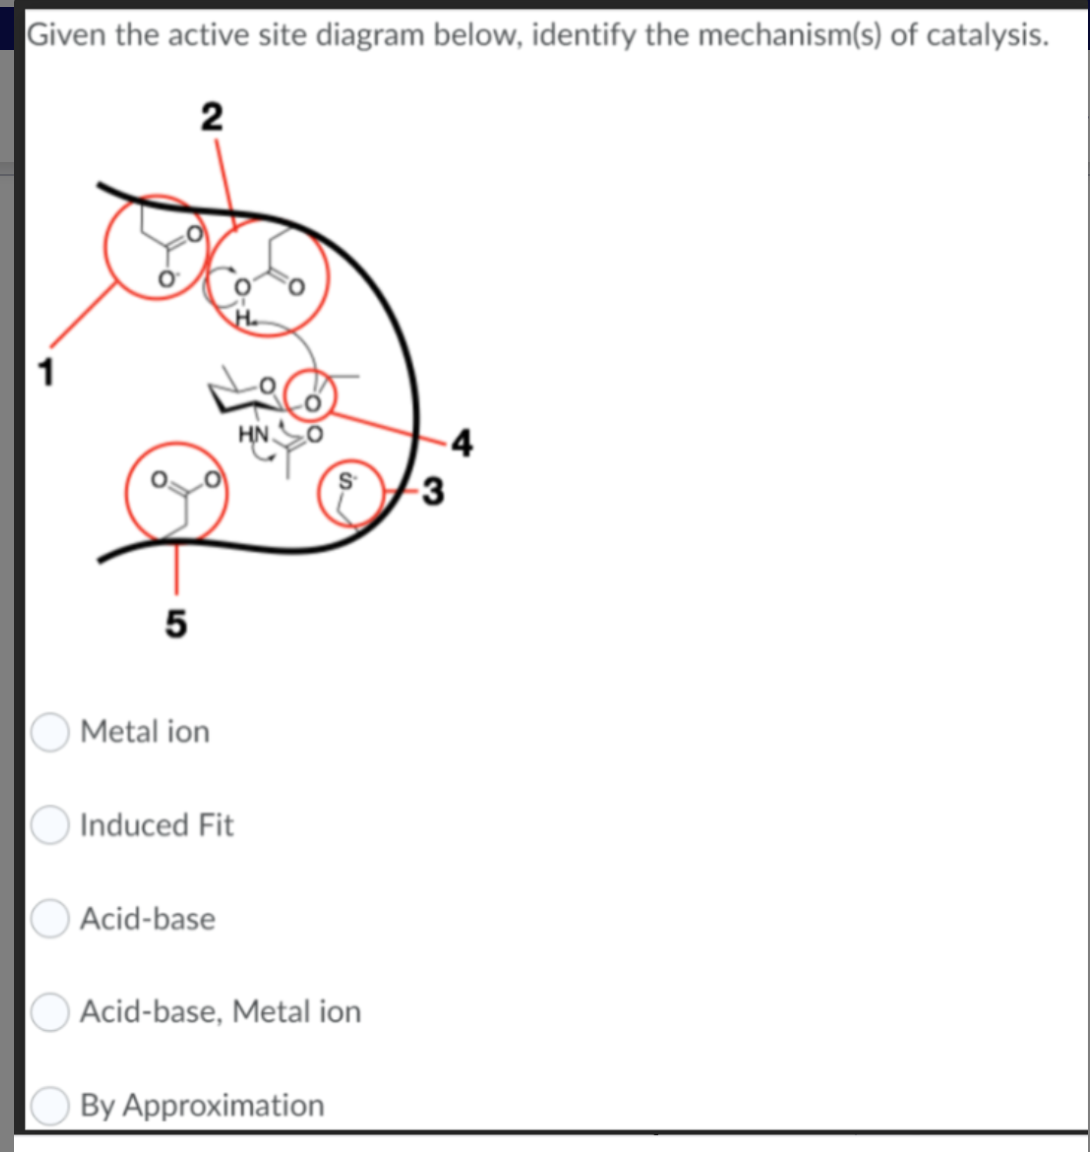 Given the active site diagram below, identify the mechanism(s) of catalysis.
2
5
Metal ion
Induced Fit
Acid-base
Acid-base, Metal ion
By Approximation
-3
4